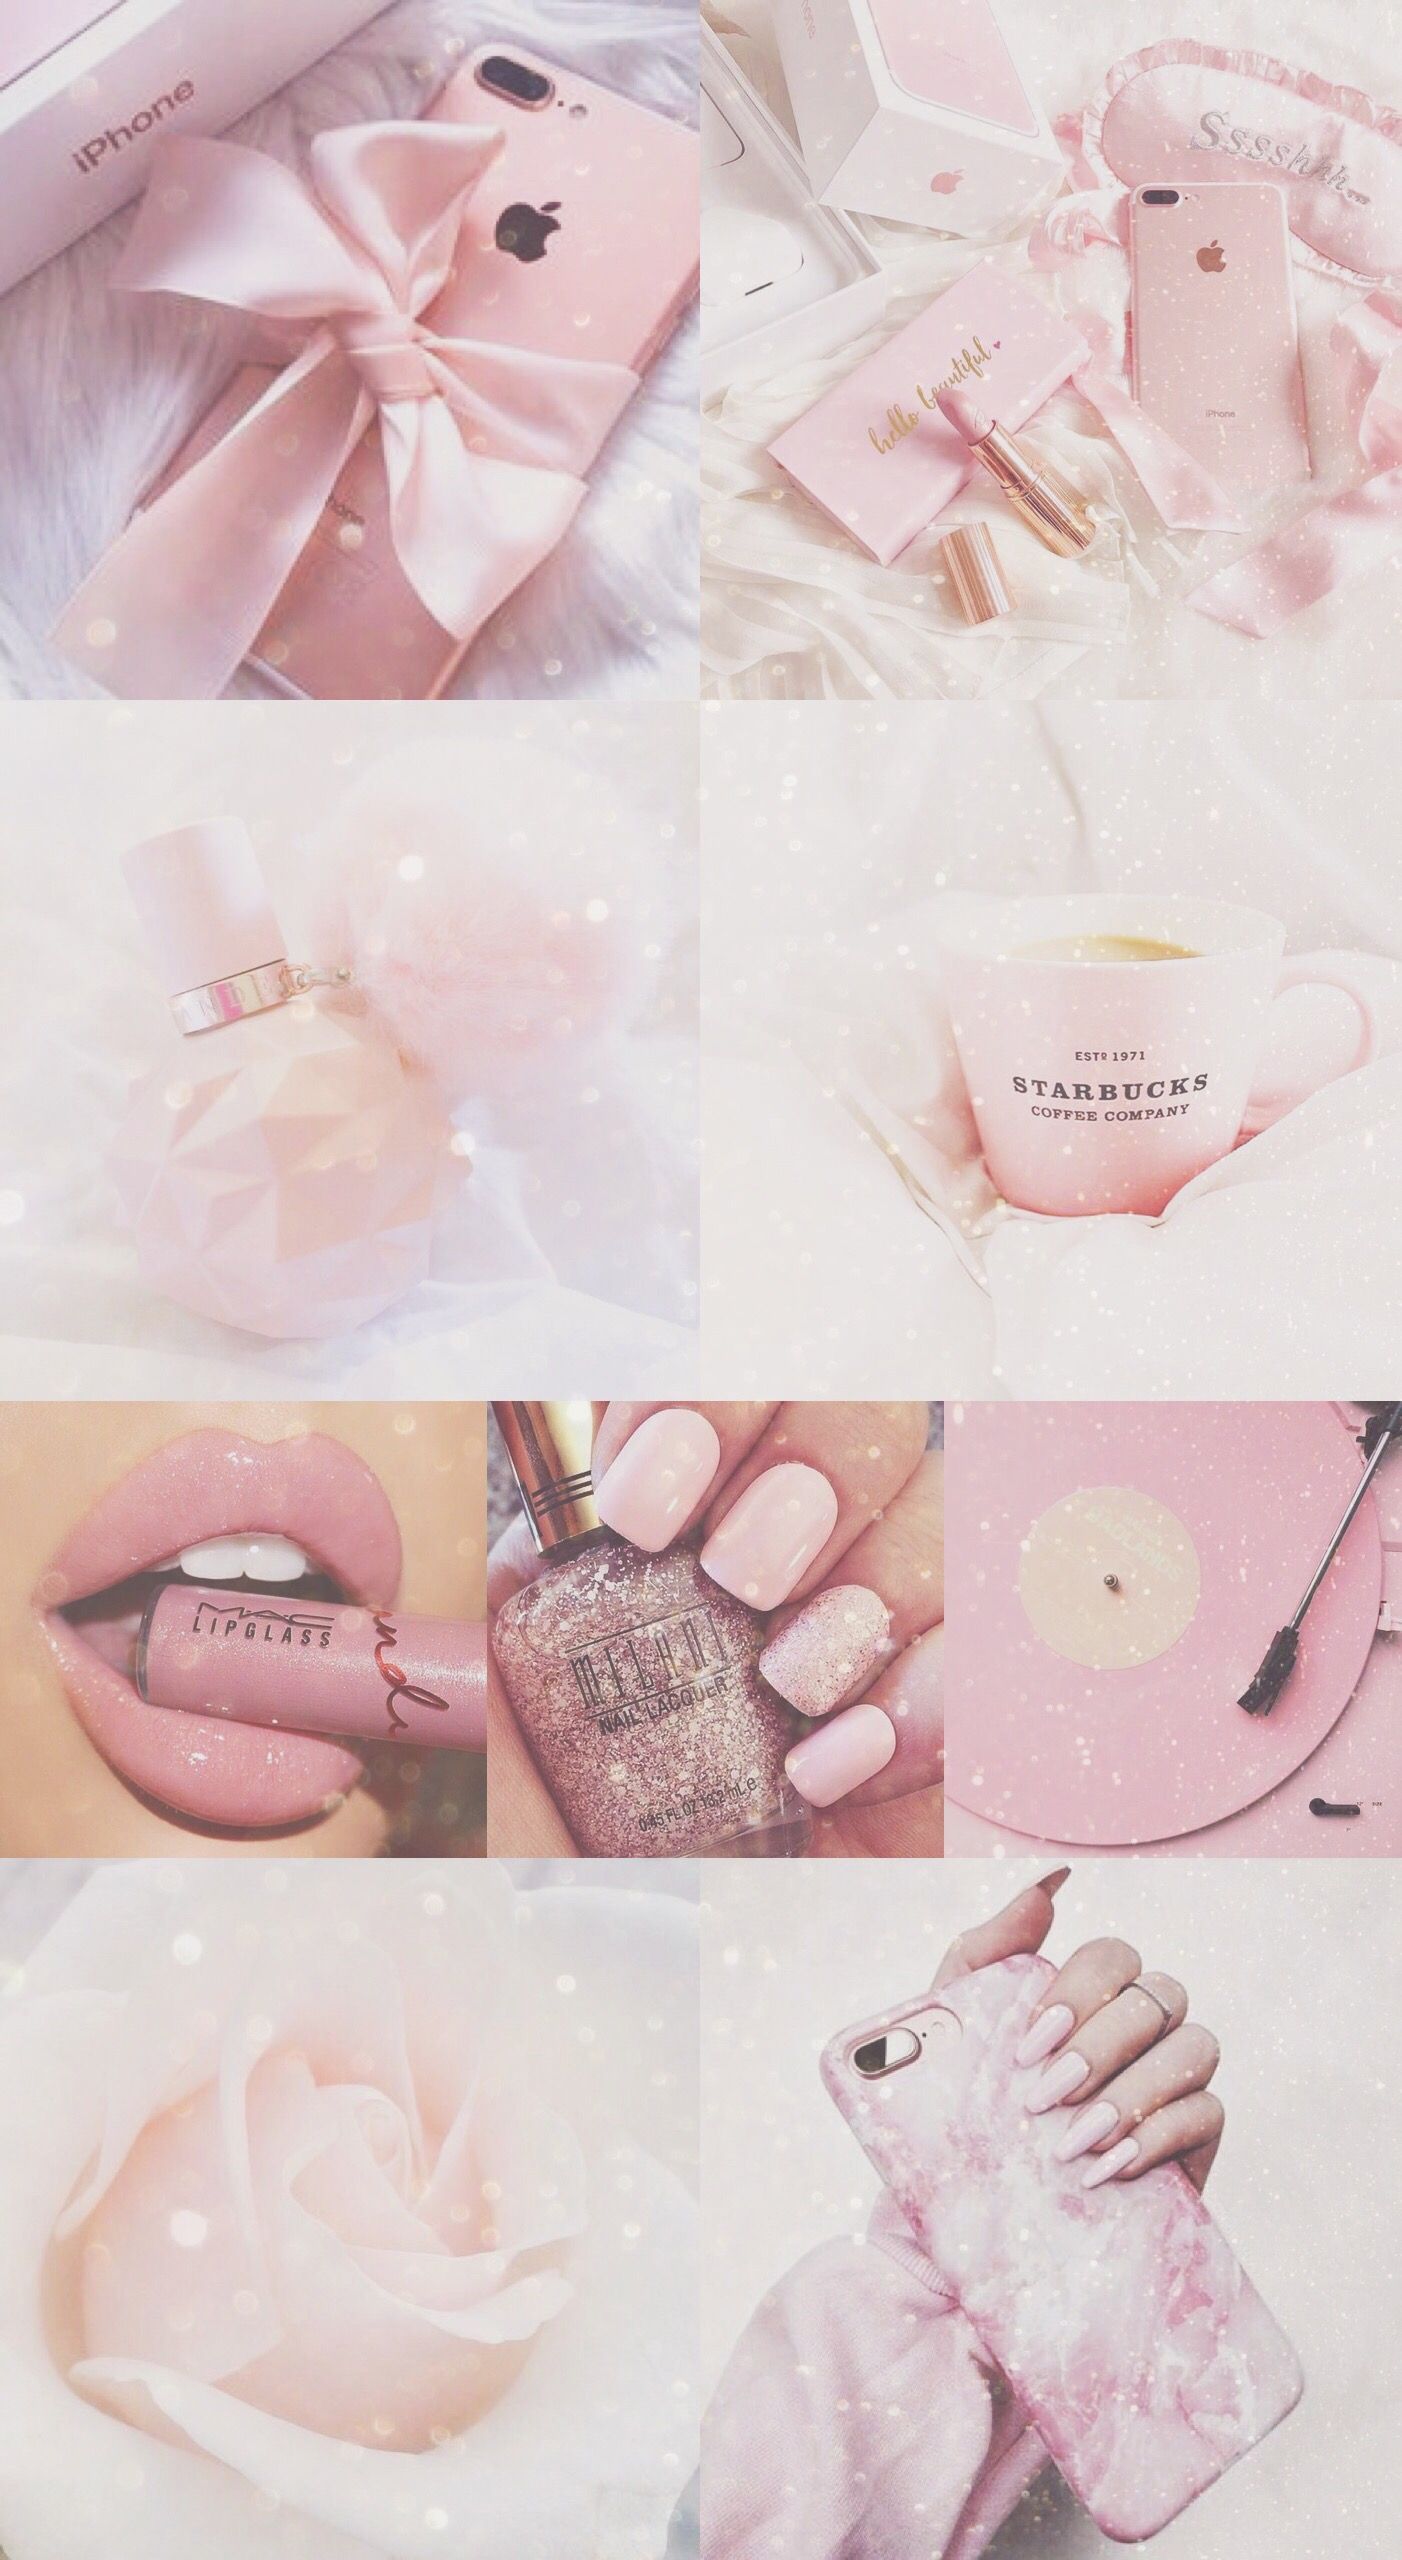 Pink aesthetic background with different pink images like a phone case, lips, nail polish, coffee cup, and a bow. - Nails